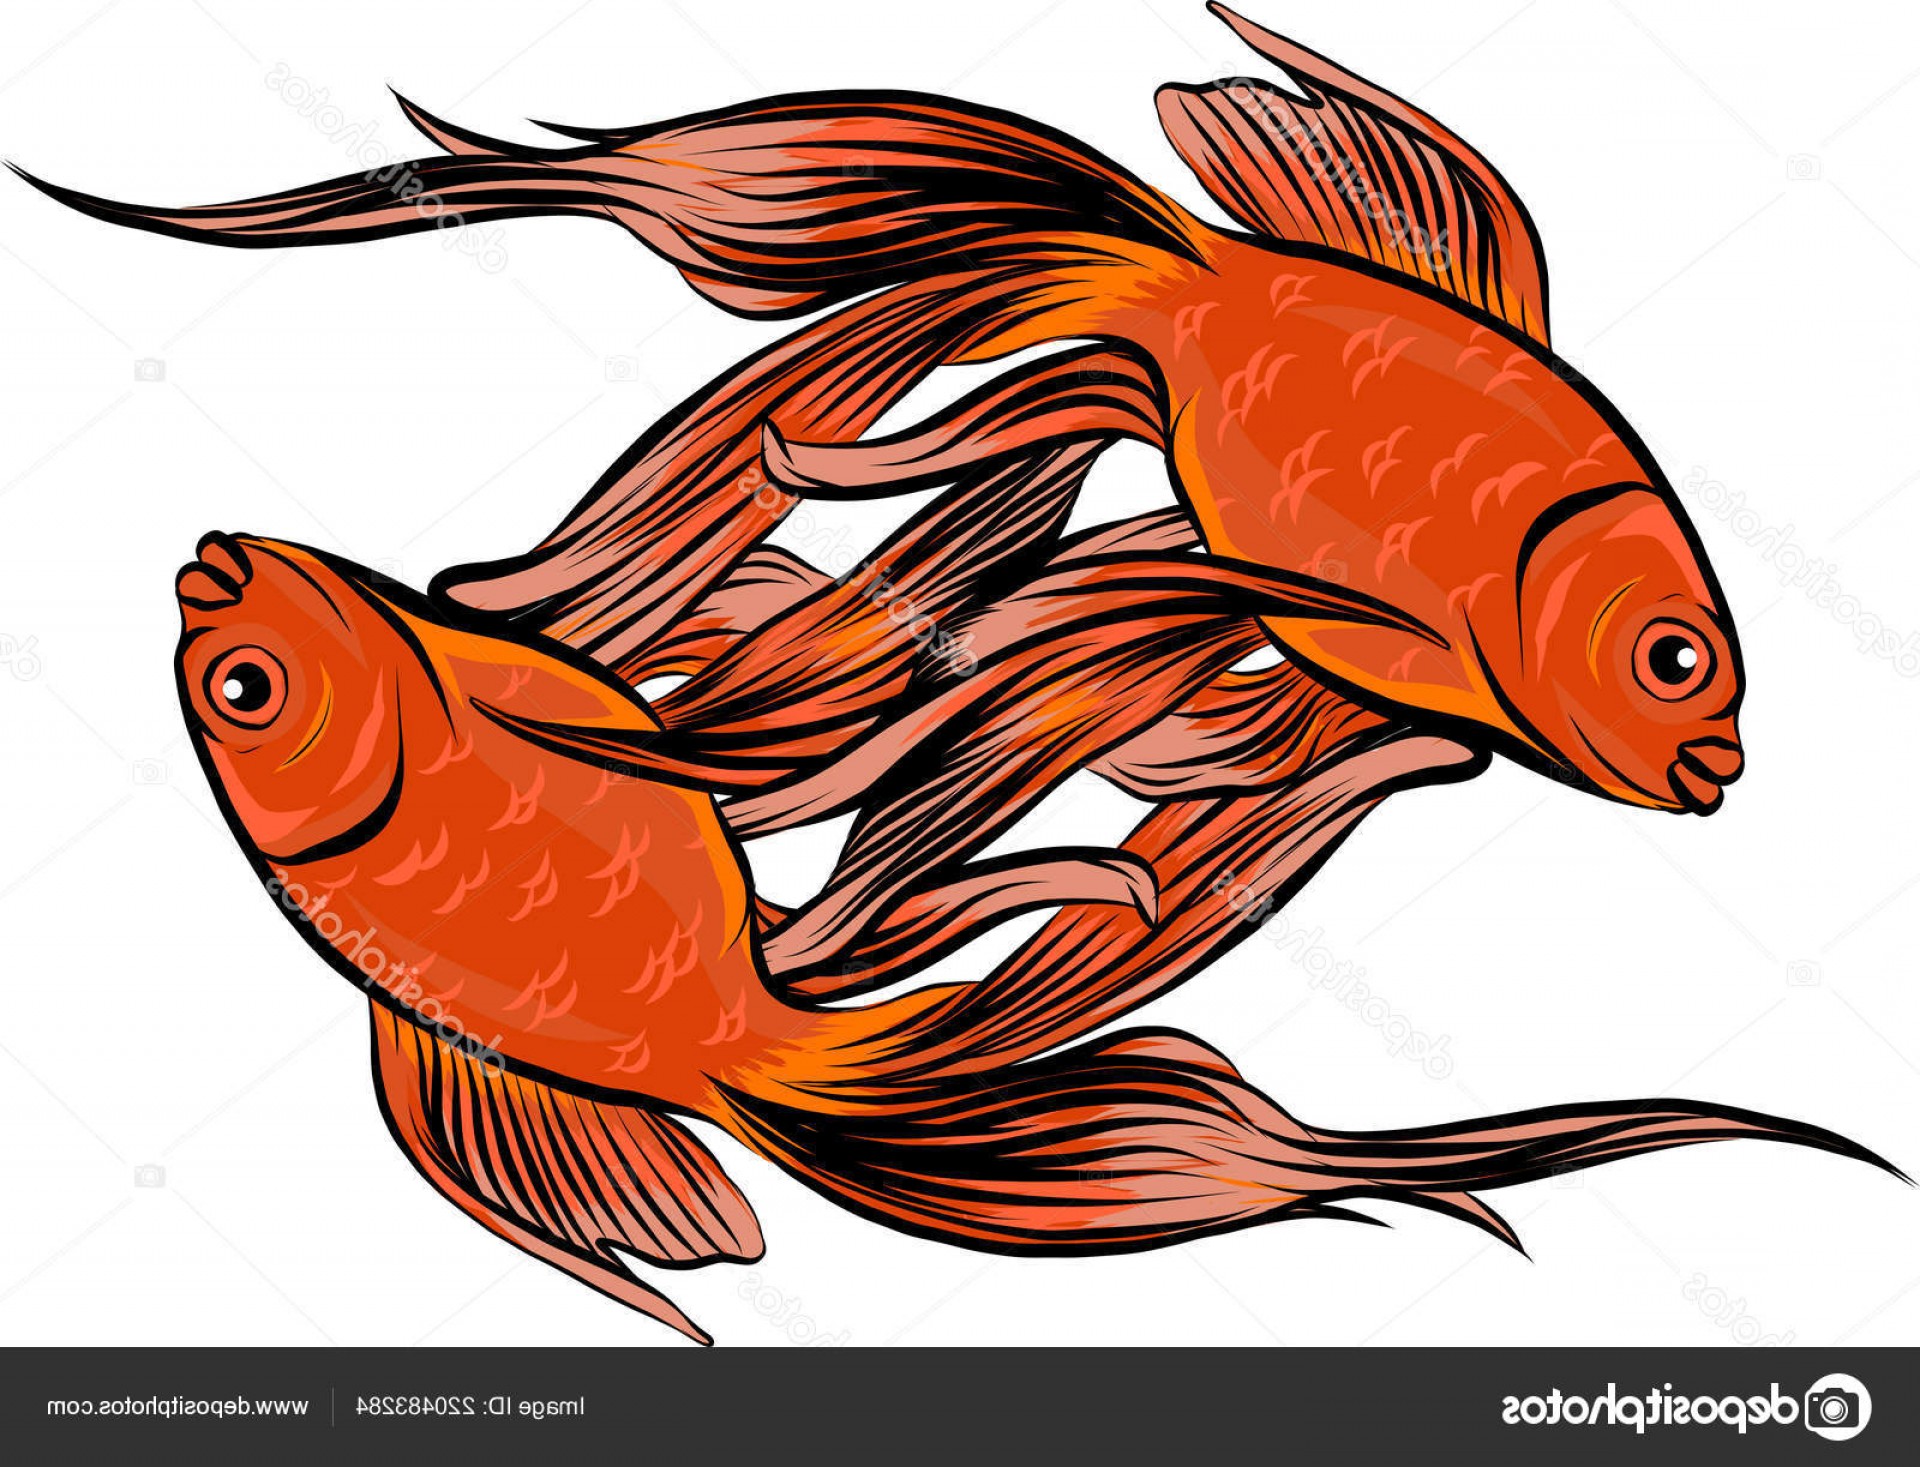 Red Fish Svg Free - 569+ Best Quality File - Free SVG Cut Files To Download